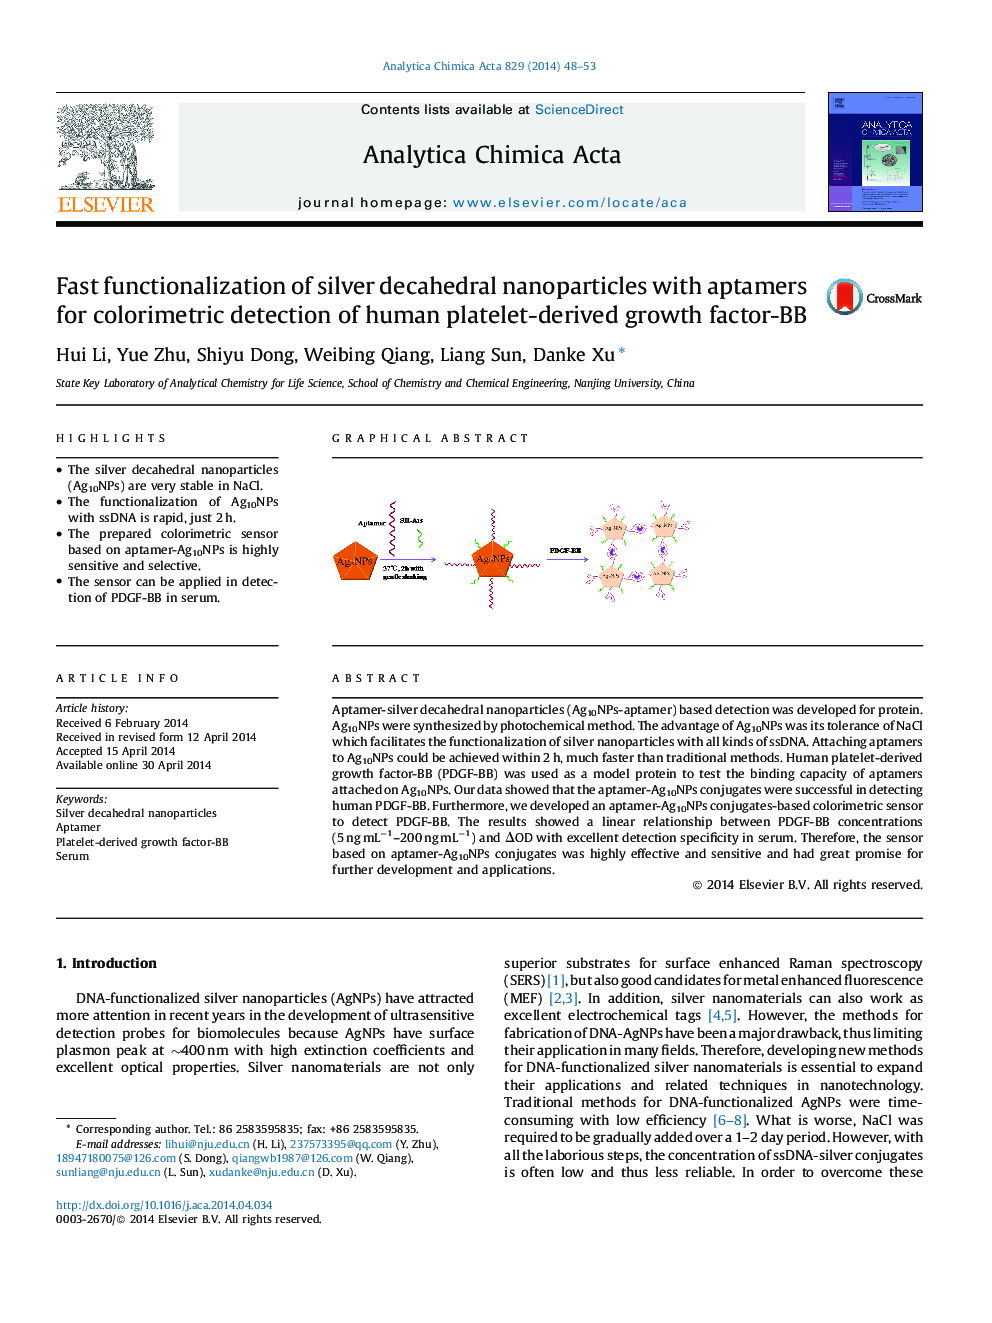 Fast functionalization of silver decahedral nanoparticles with aptamers for colorimetric detection of human platelet-derived growth factor-BB